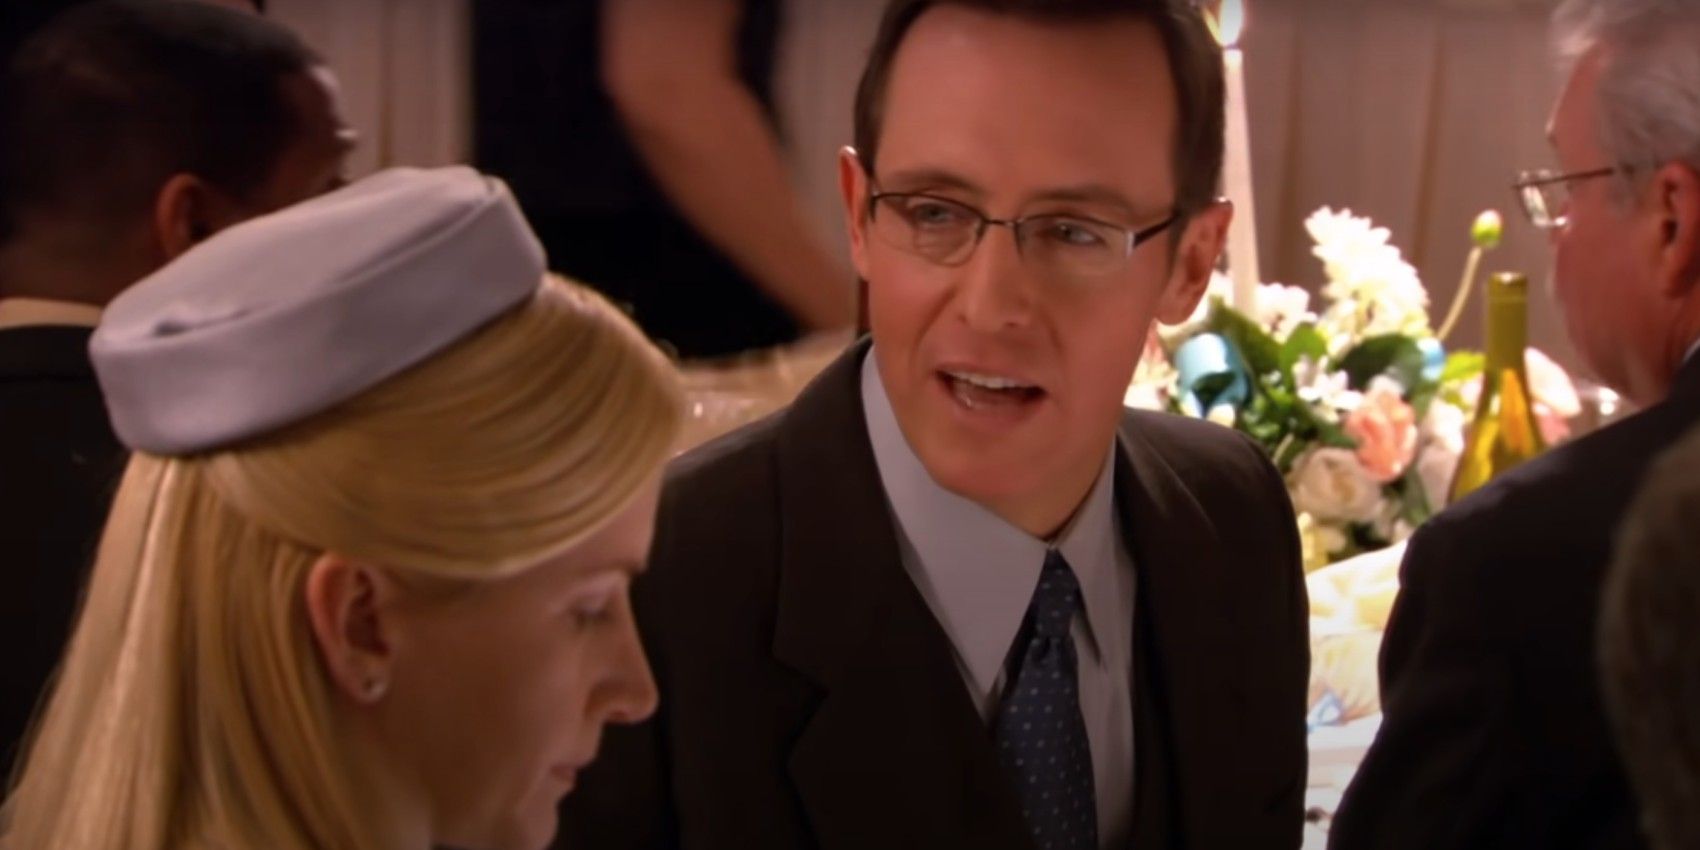 A deleted scene from The Office s3e16 Phyllis's Wedding featured a potential Angela love interest, Dennis